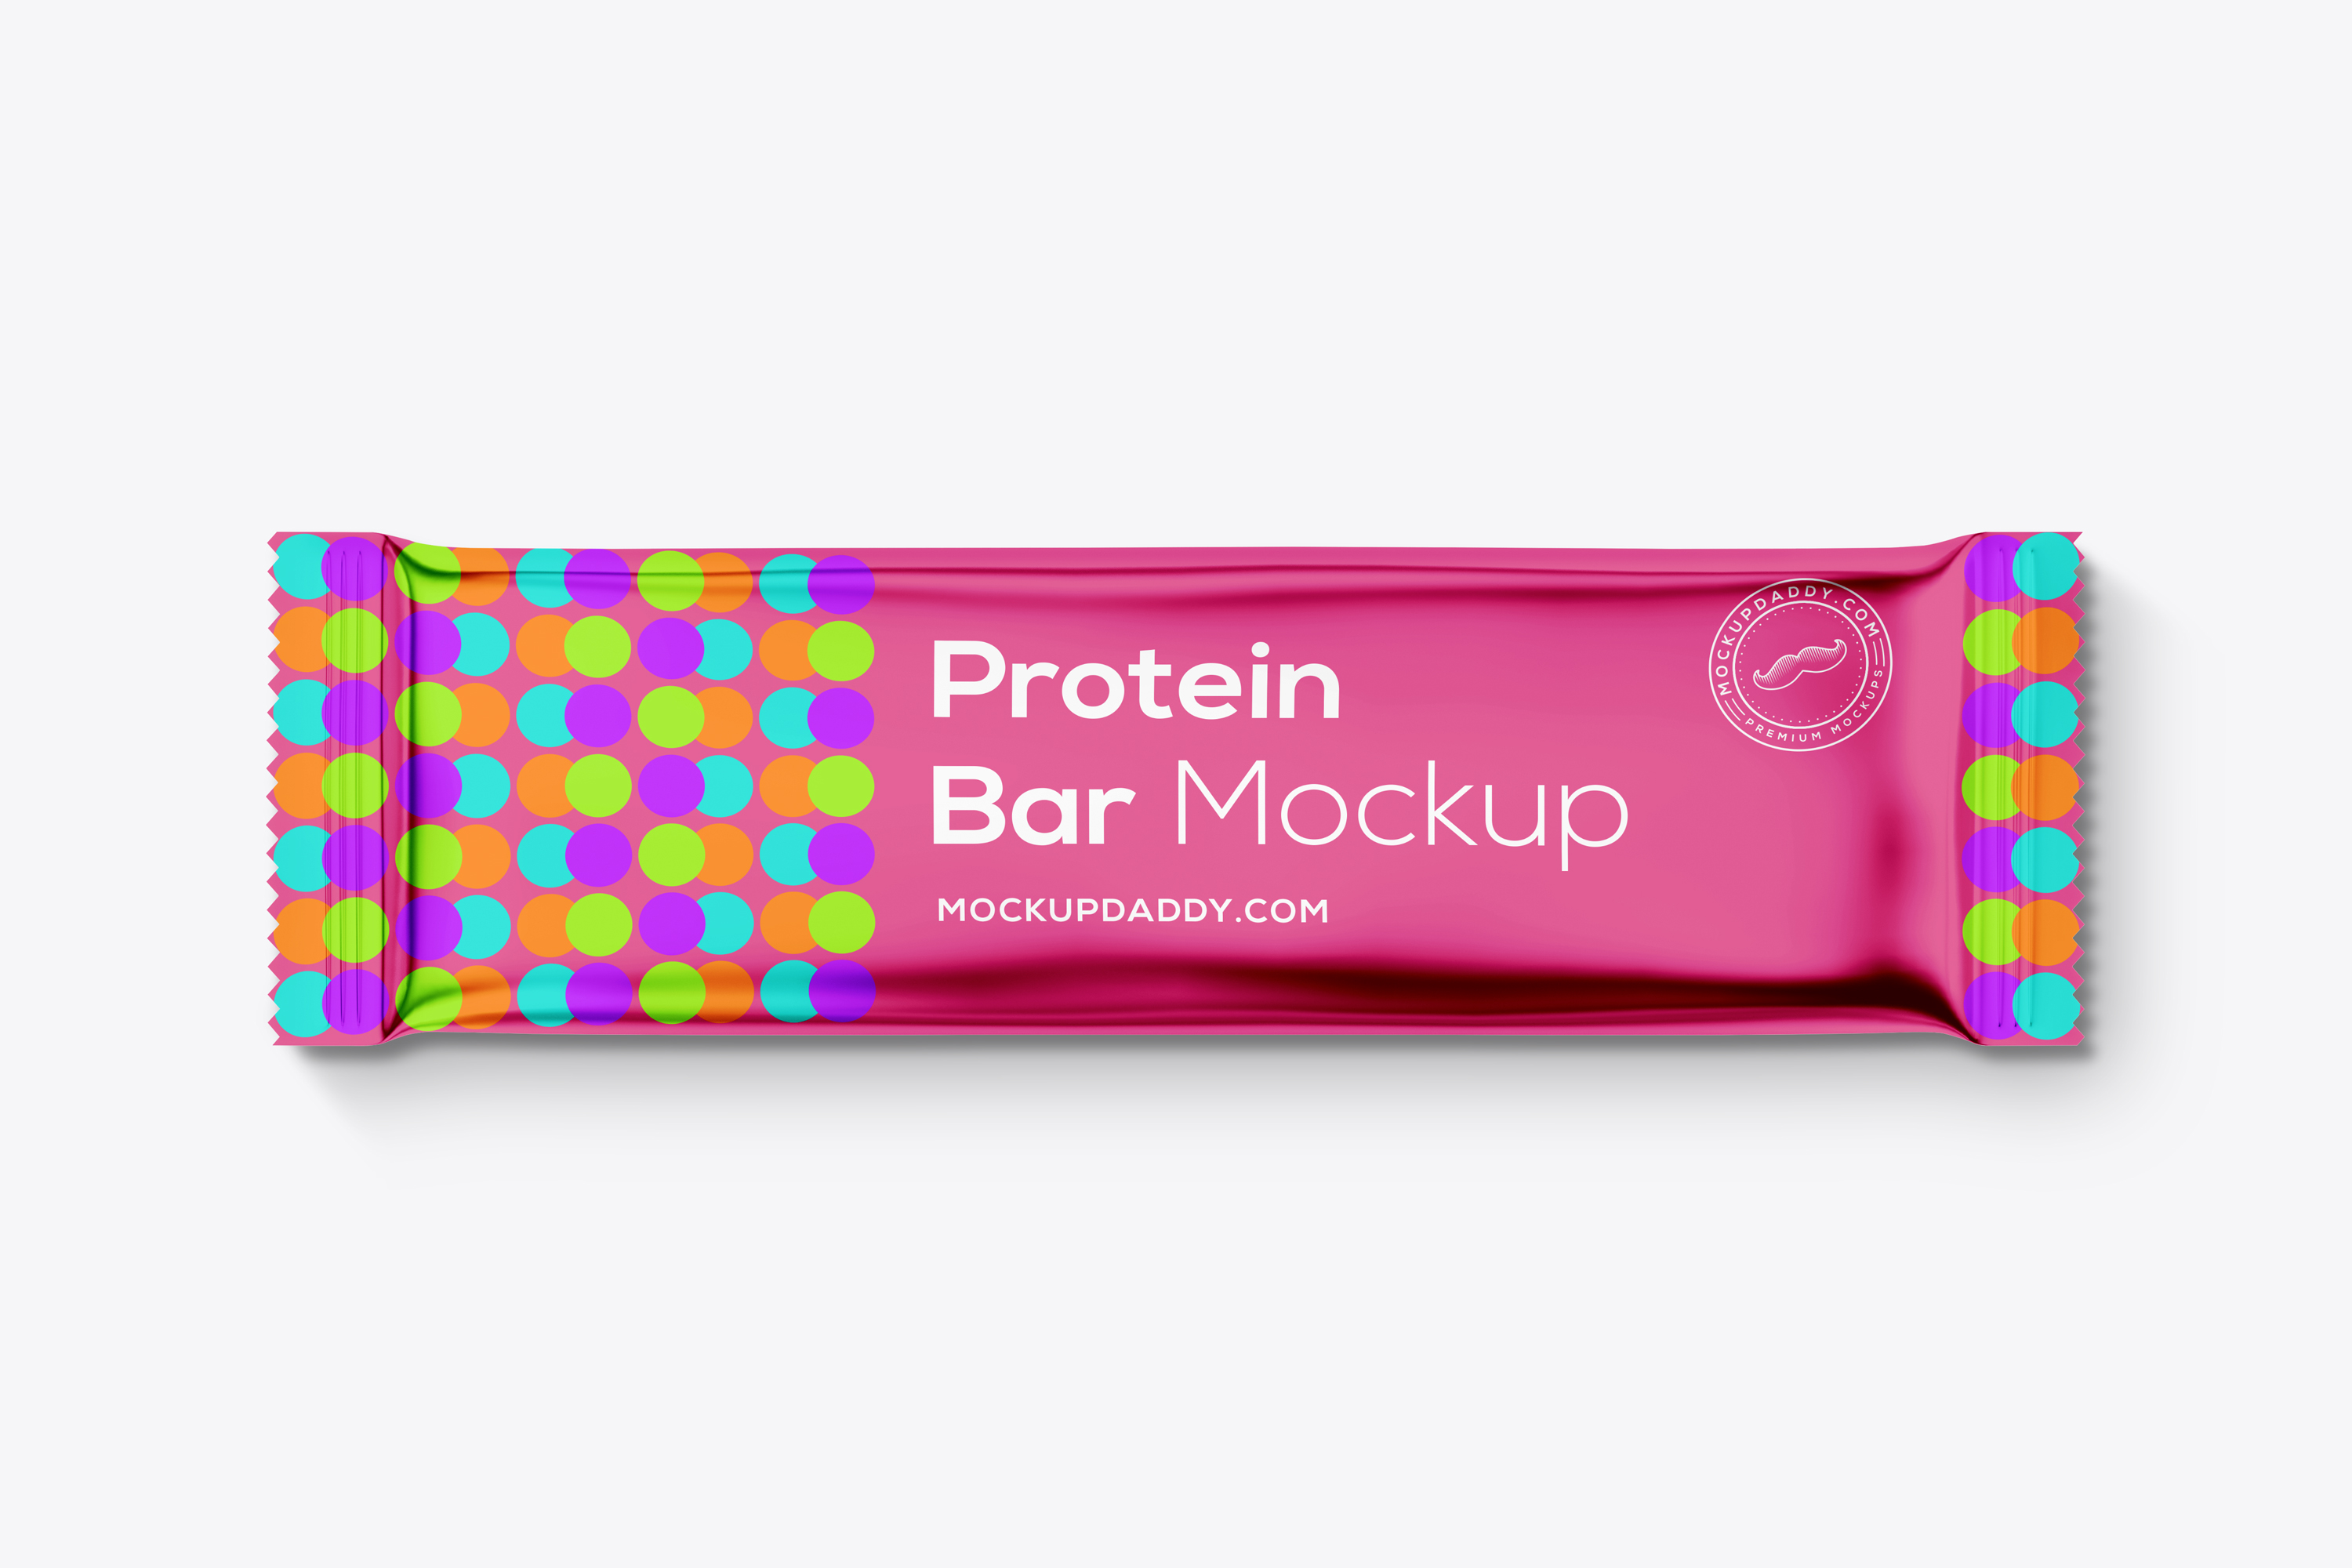 Digital mockup of a protein bar with customizable label.